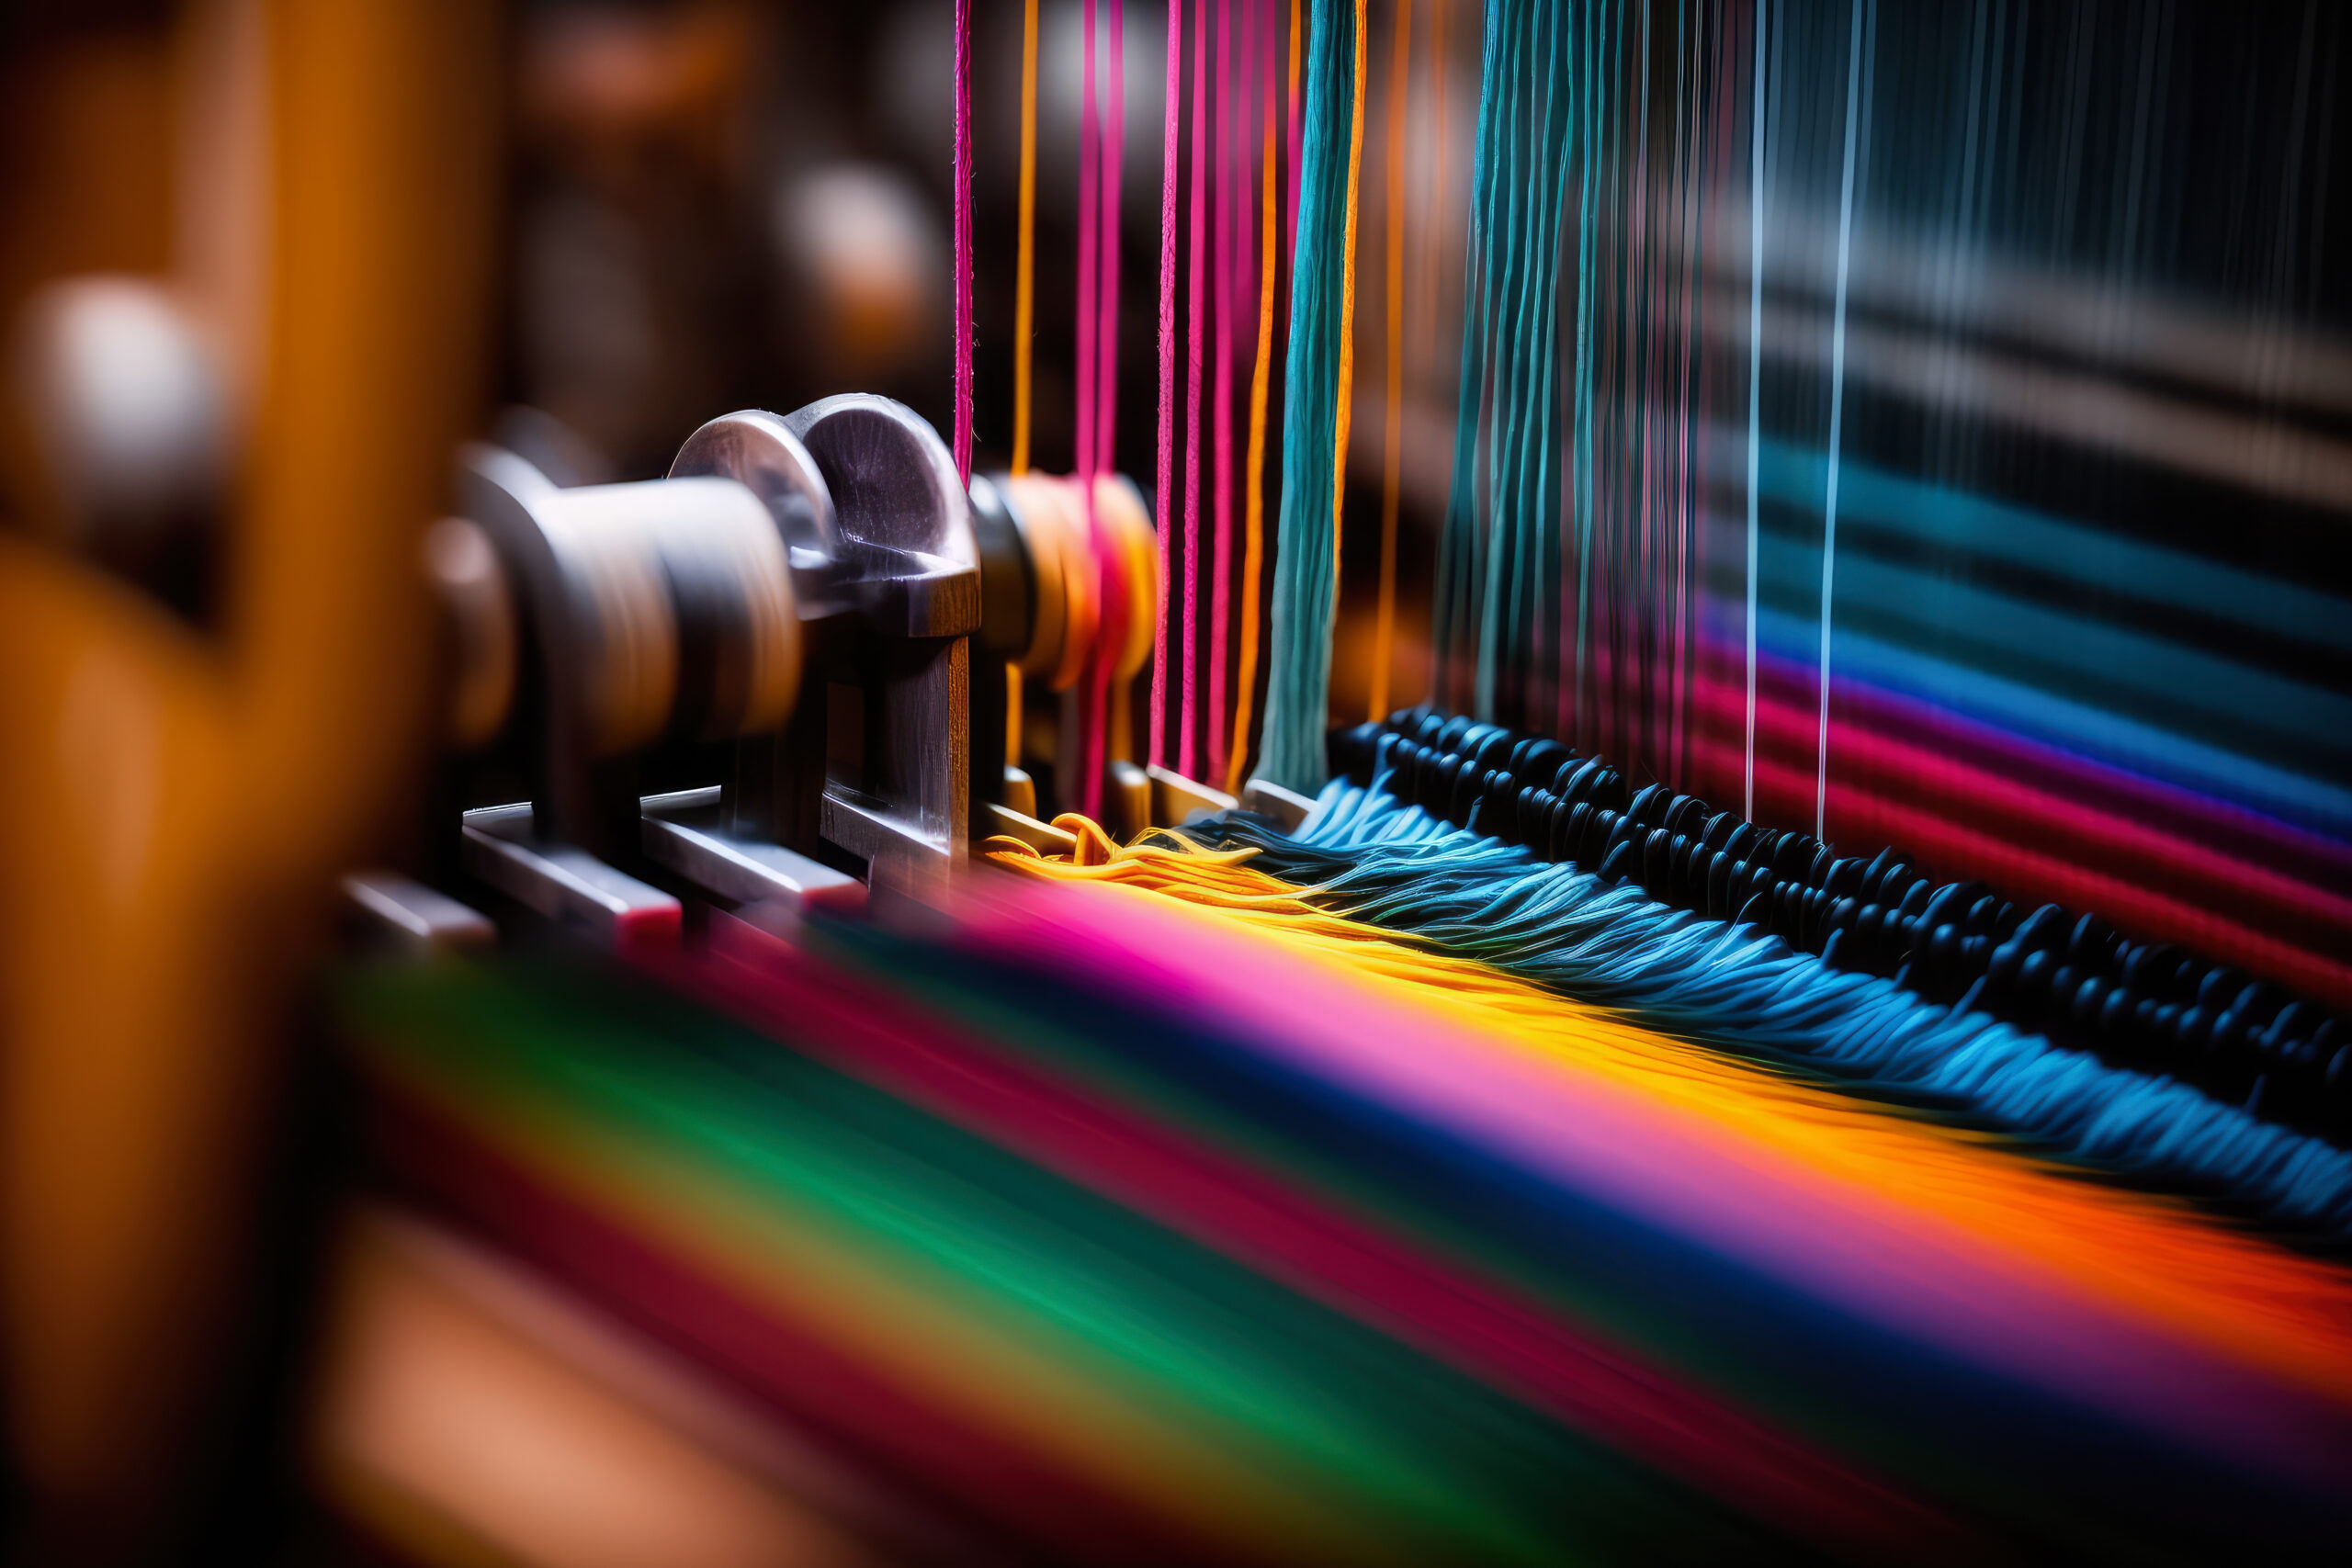 abstract image of a loom at work, with blurry motion and vibrant